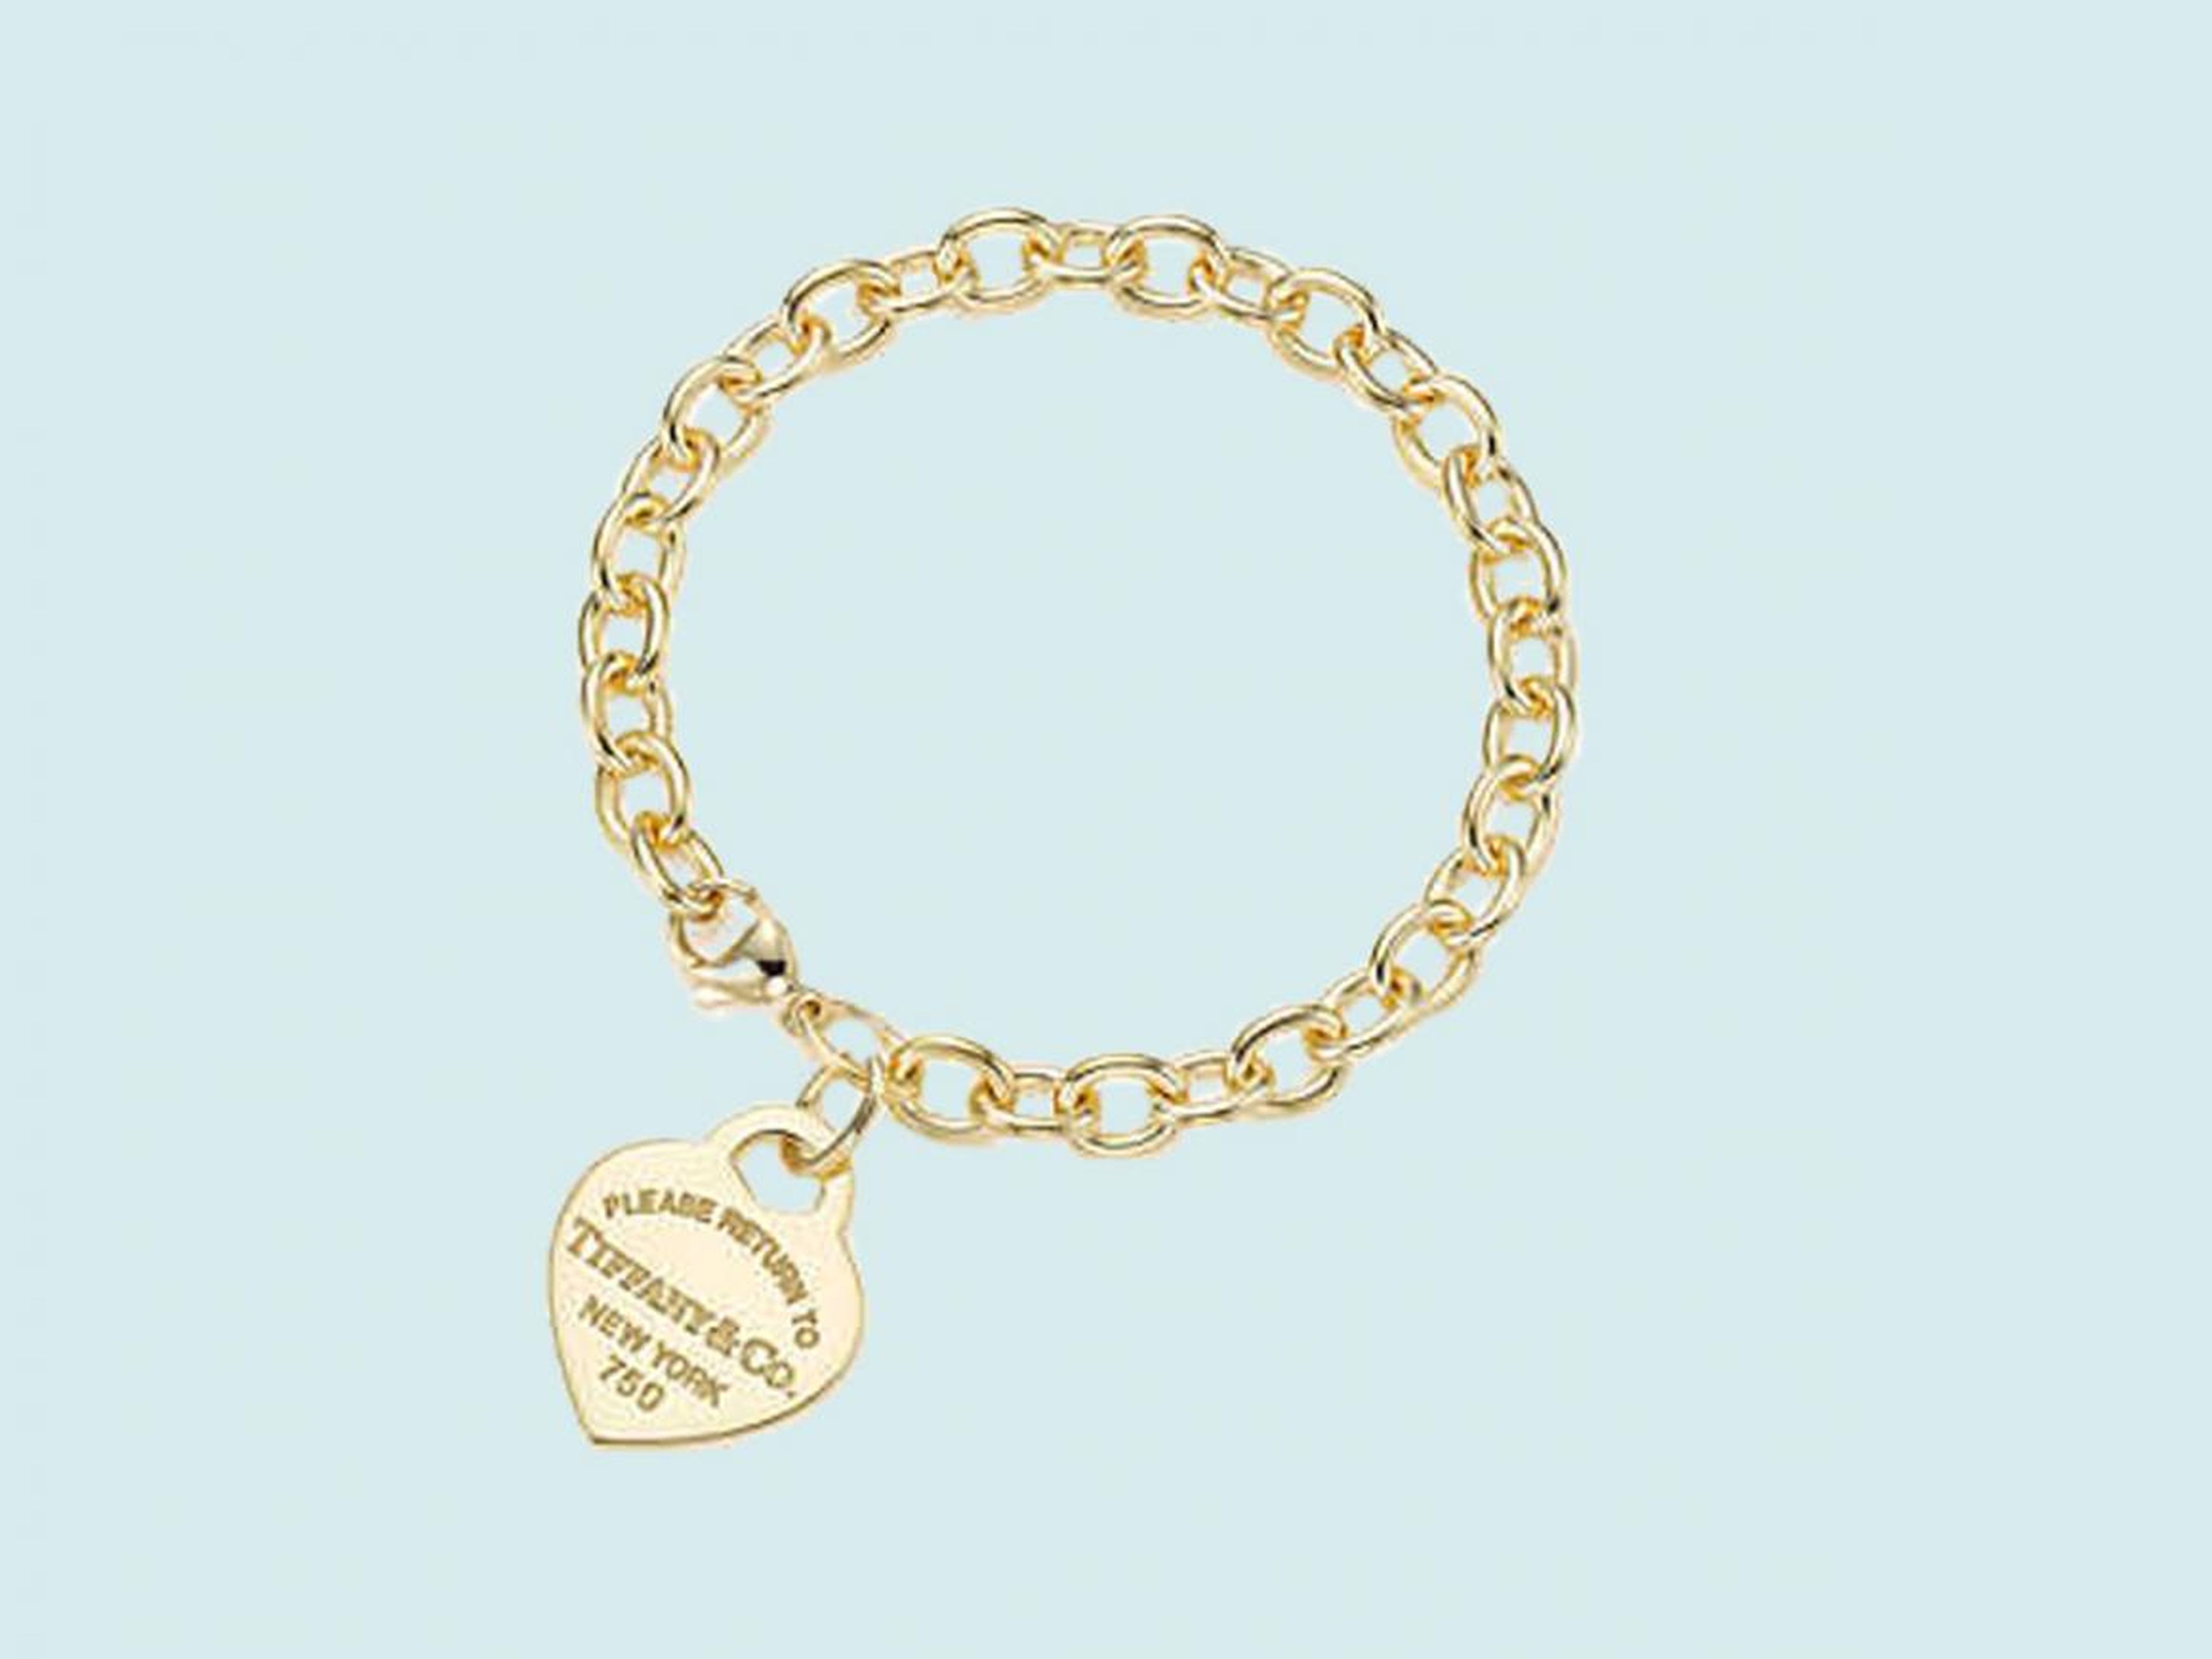 The Return to Tiffany bracelet is included comes with the purchase.